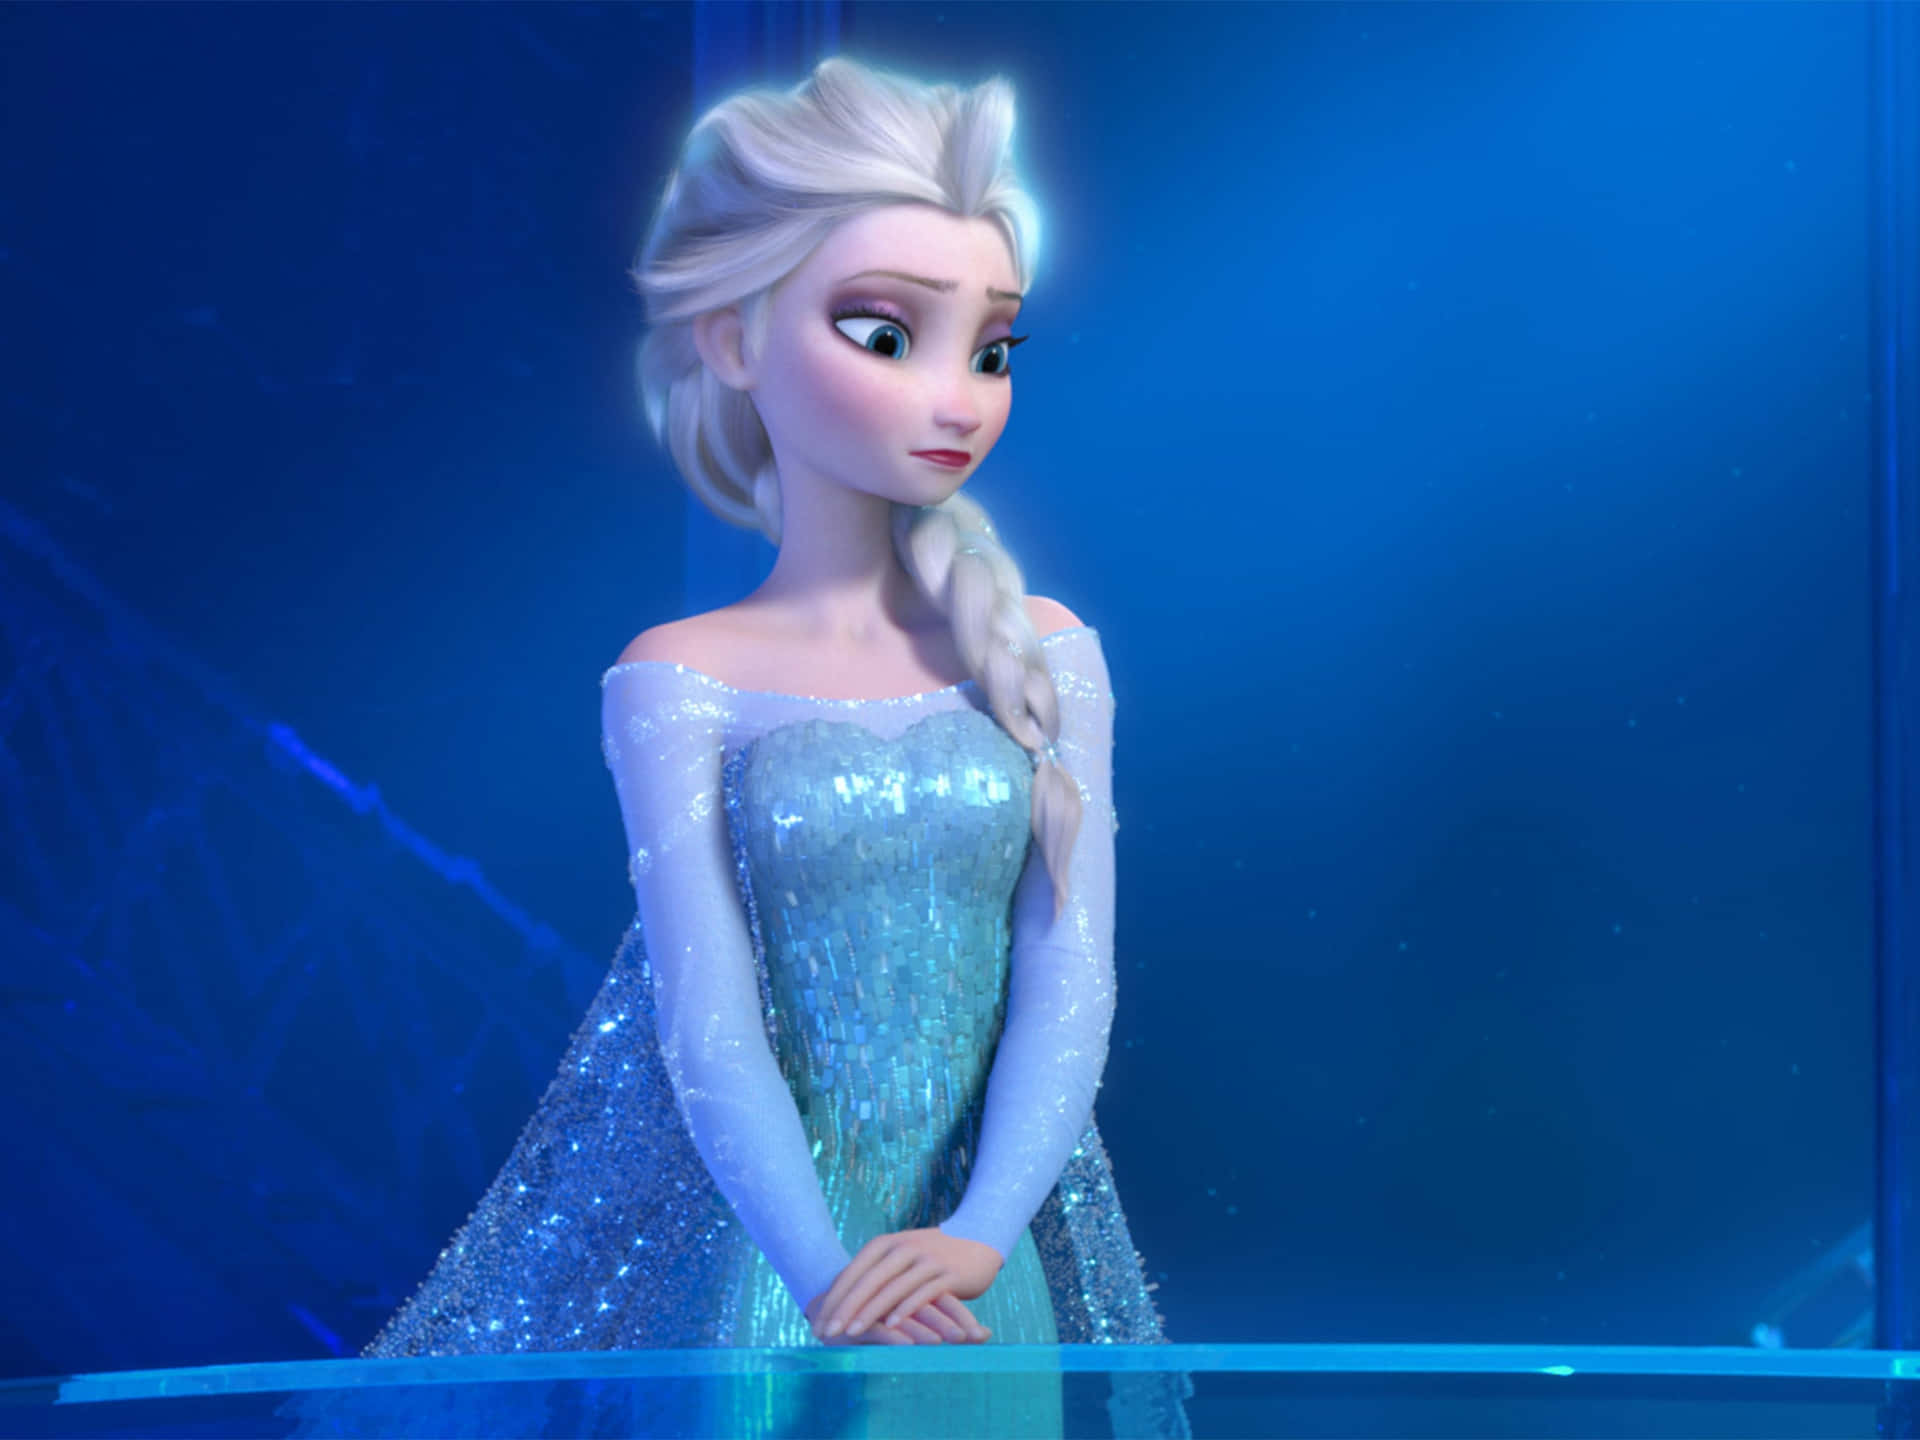 Embrace your own power, like Elsa.